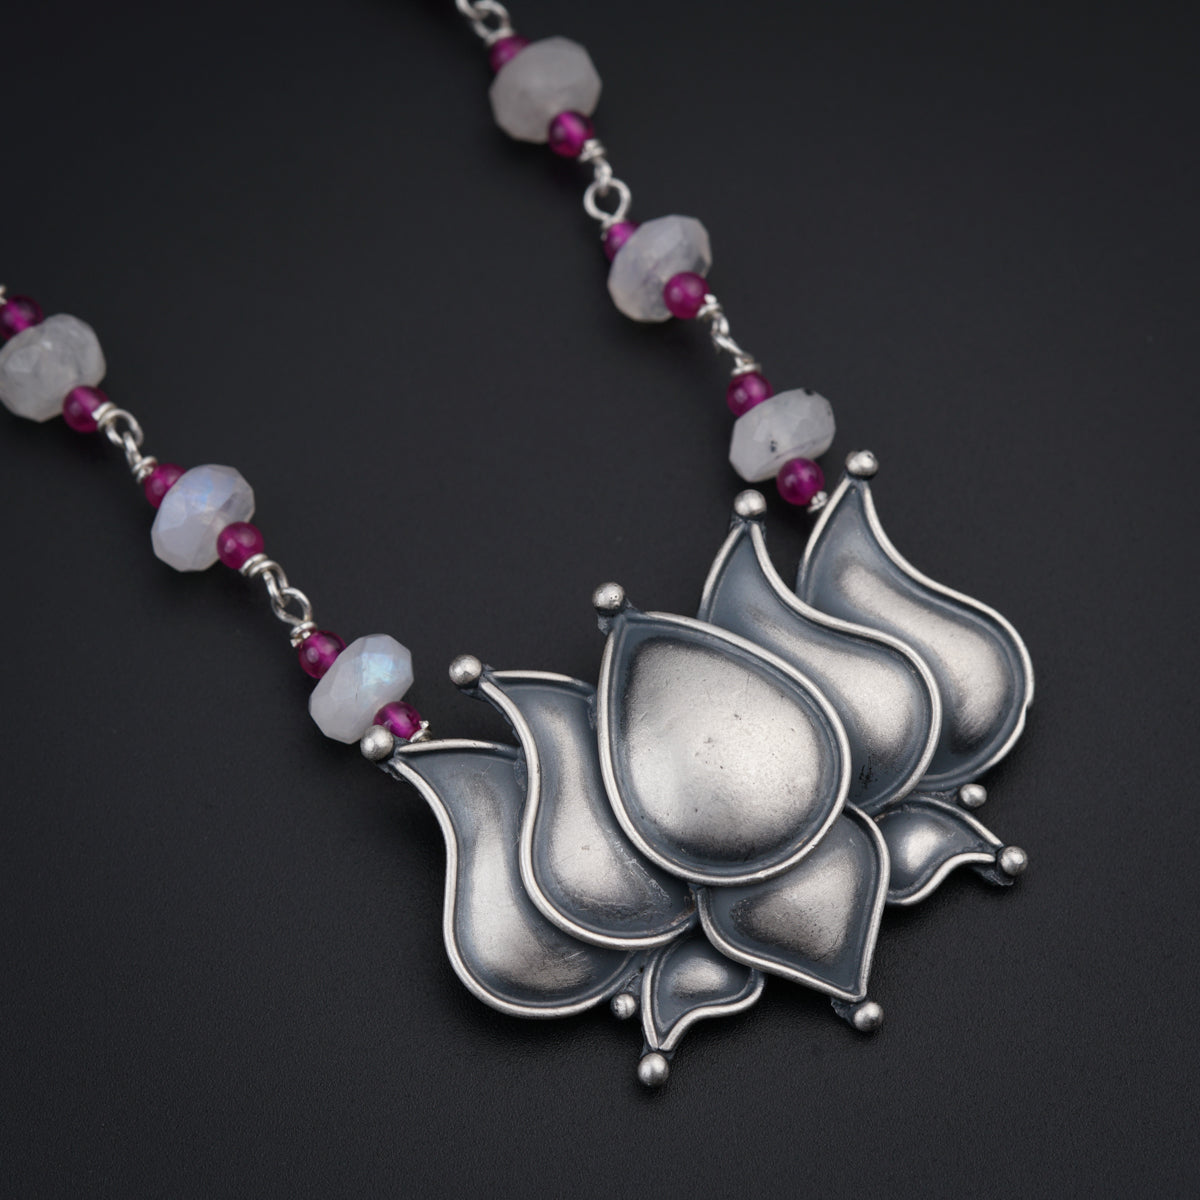 a necklace with a flower and beads on it